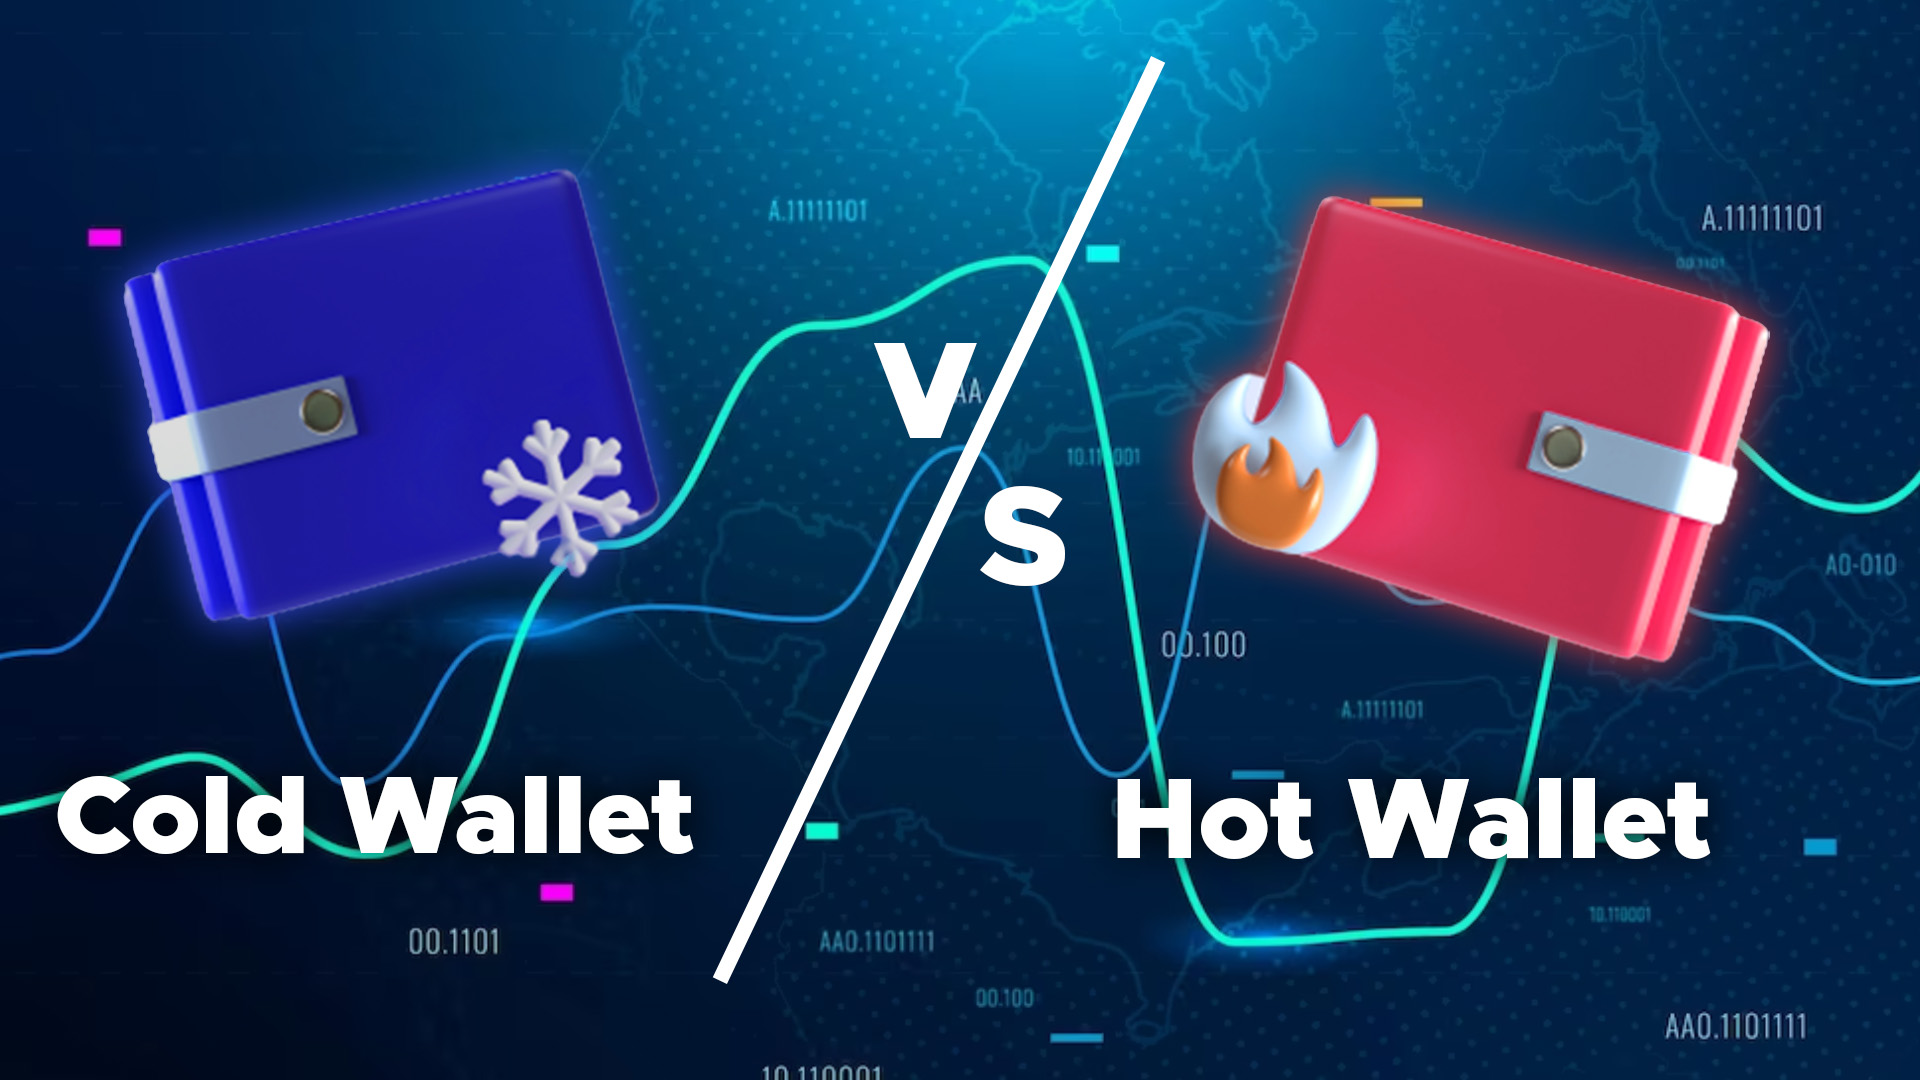 Which is better mode to store crypto: Hot Wallet Vs Cold Wallet